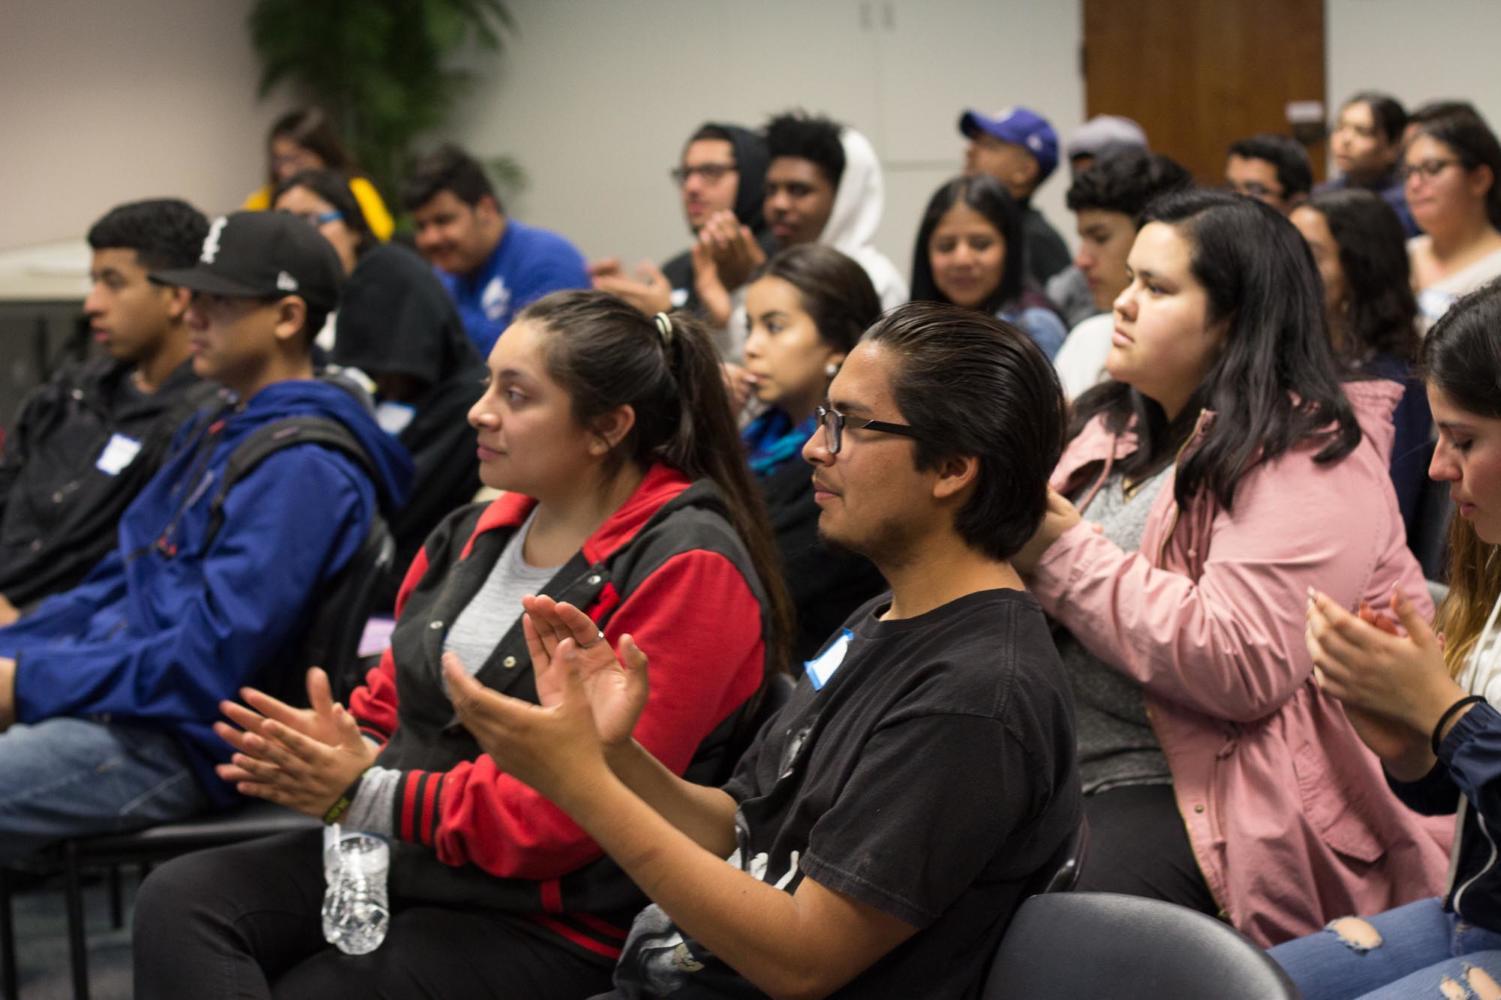 Lynwood High School students applaud guest speakers during the College Bridge: An Ethnic Studies Exchange event in the Anatol Center. The event featured a workshop to help prepare for college.